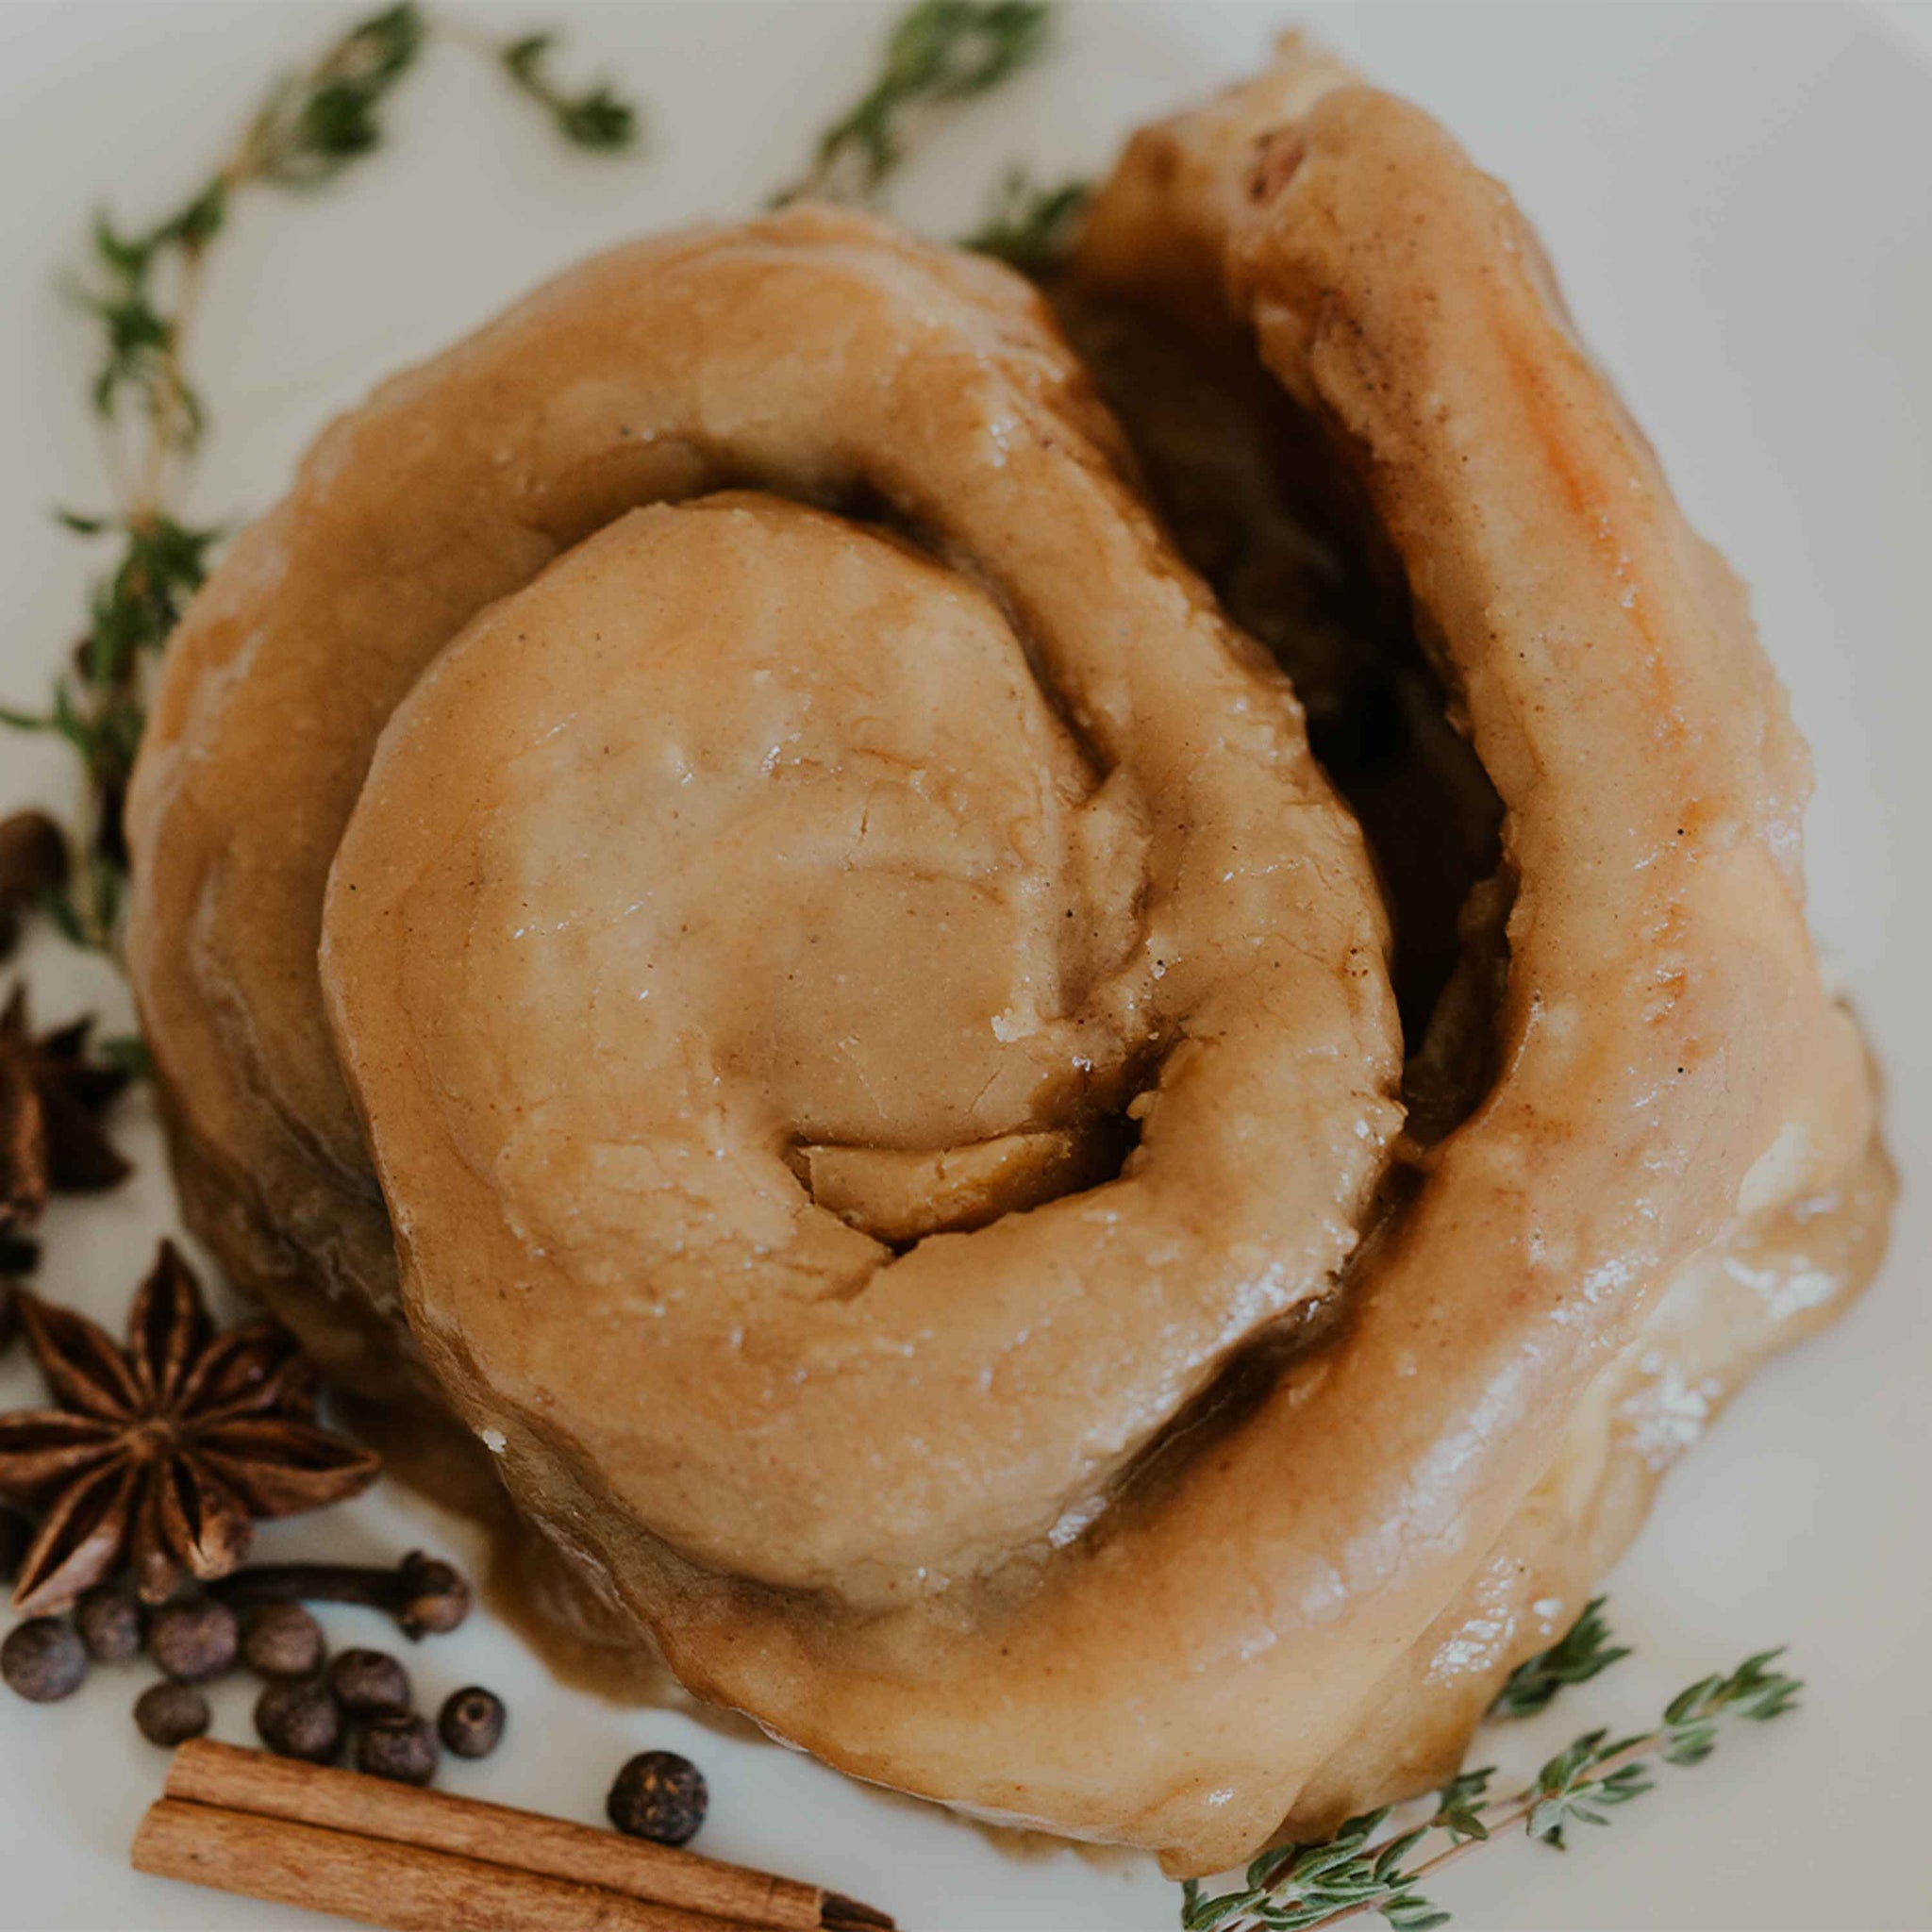 May 22nd | Cinnamon Rolls | Sanpete/Sevier County